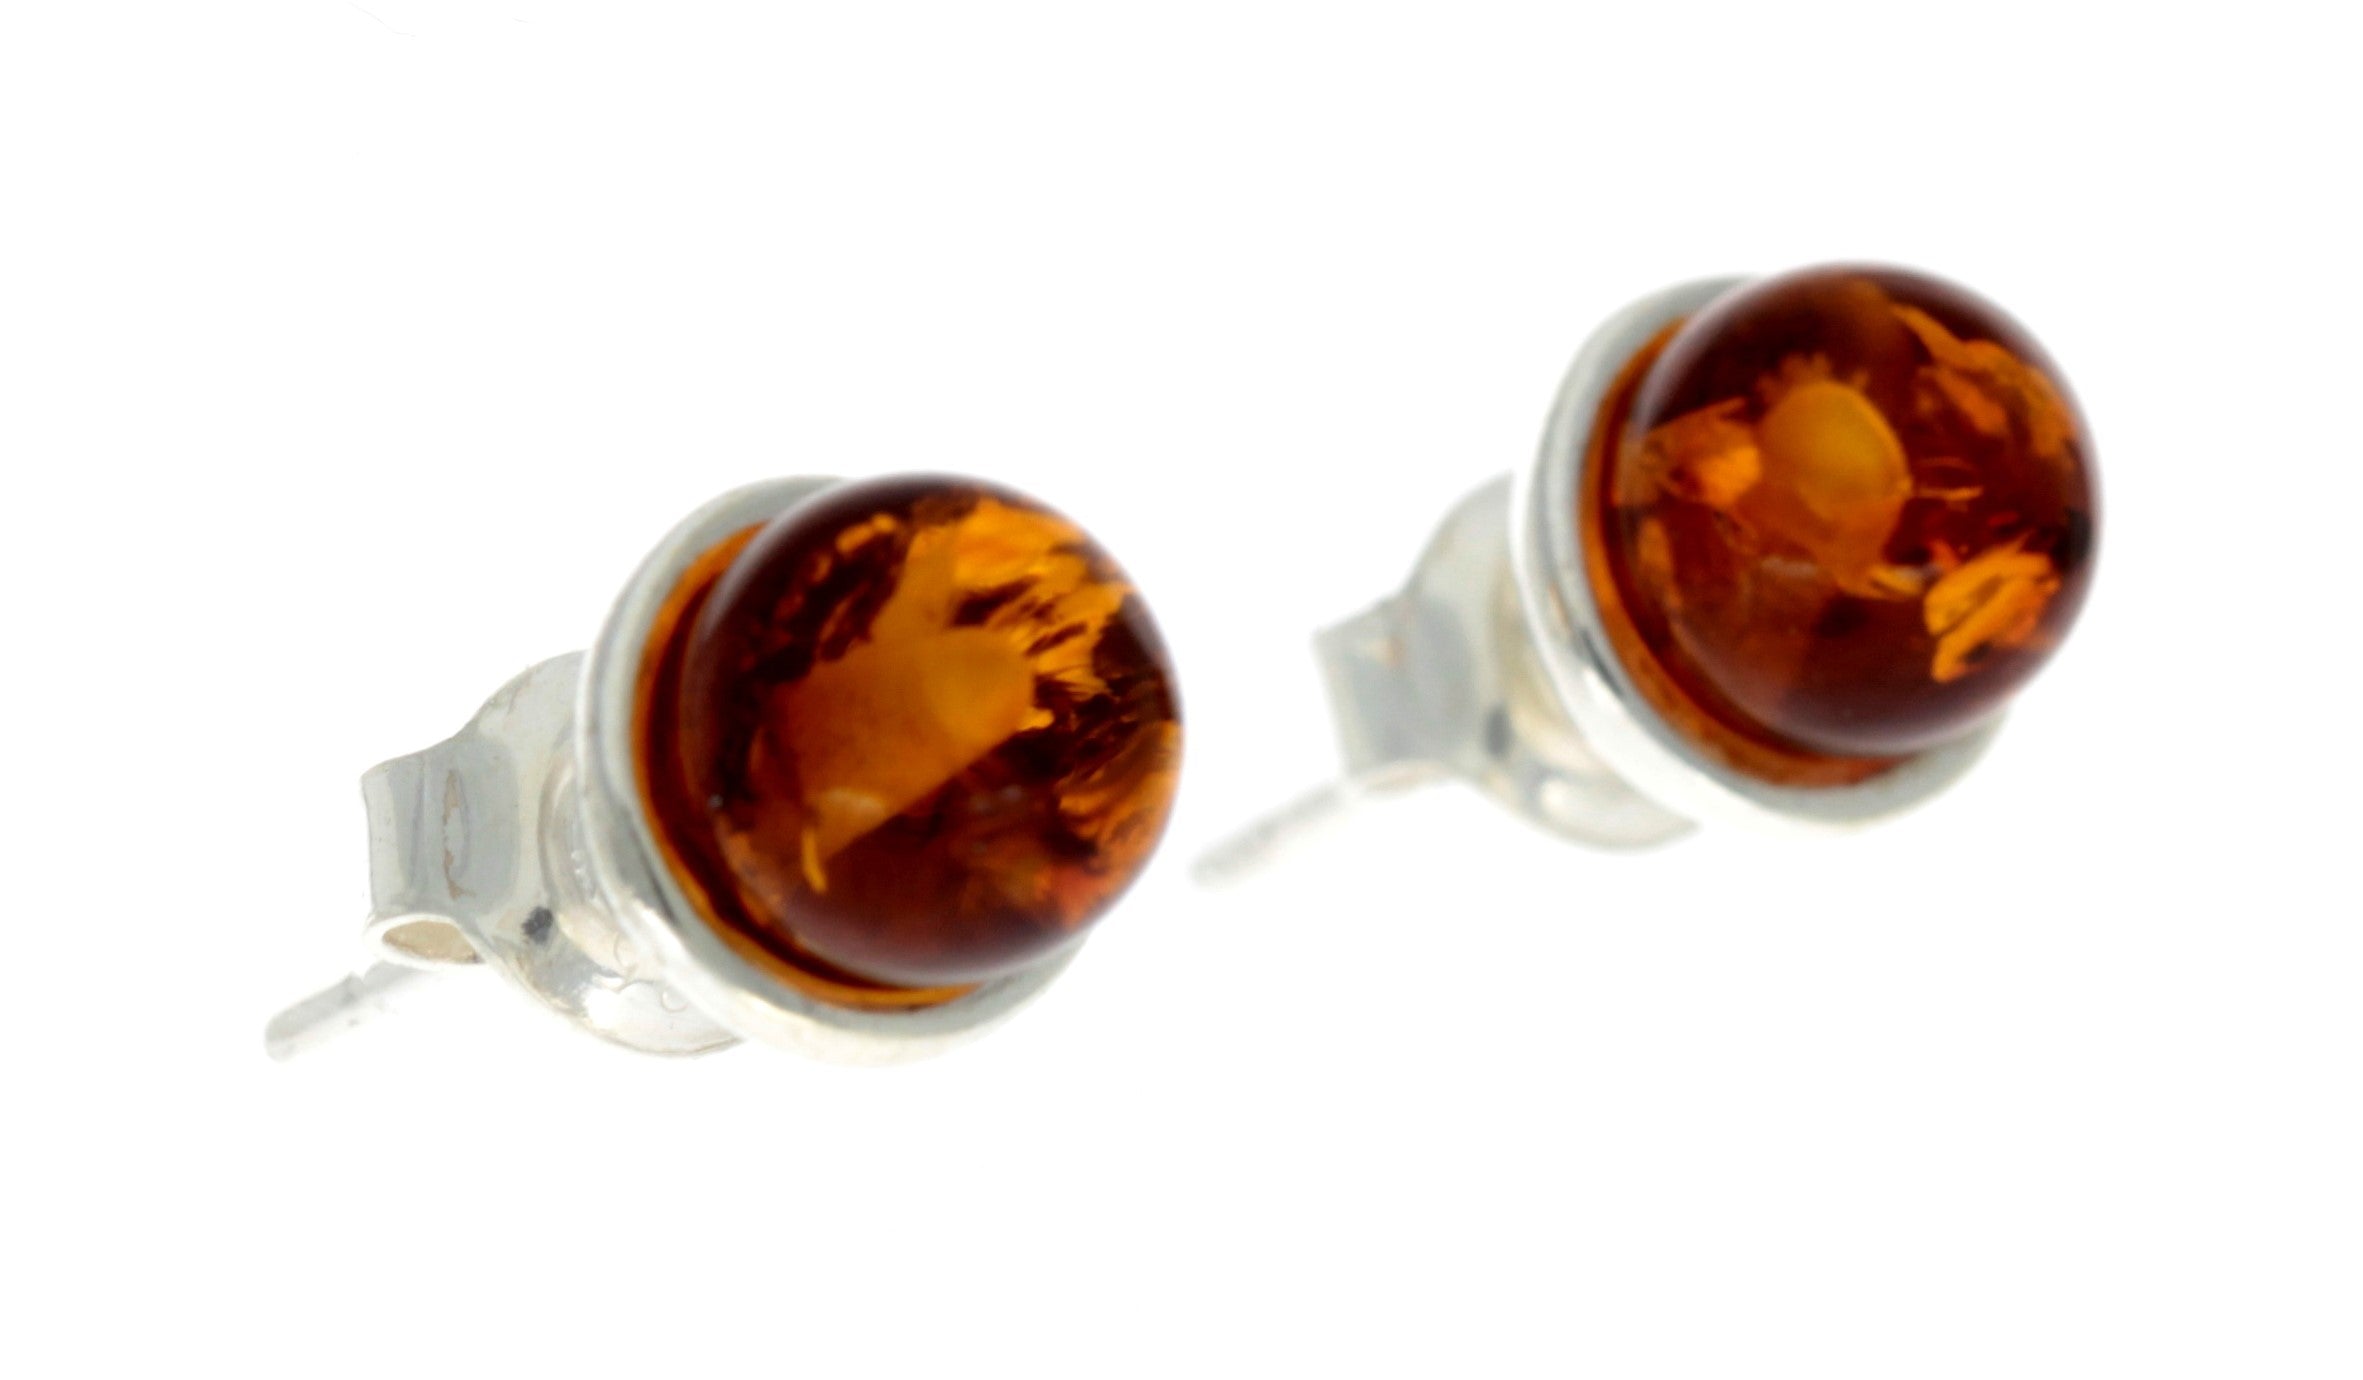 925 Sterling Silver & Genuine Baltic Amber Classic Round Studs Earrings - GL157